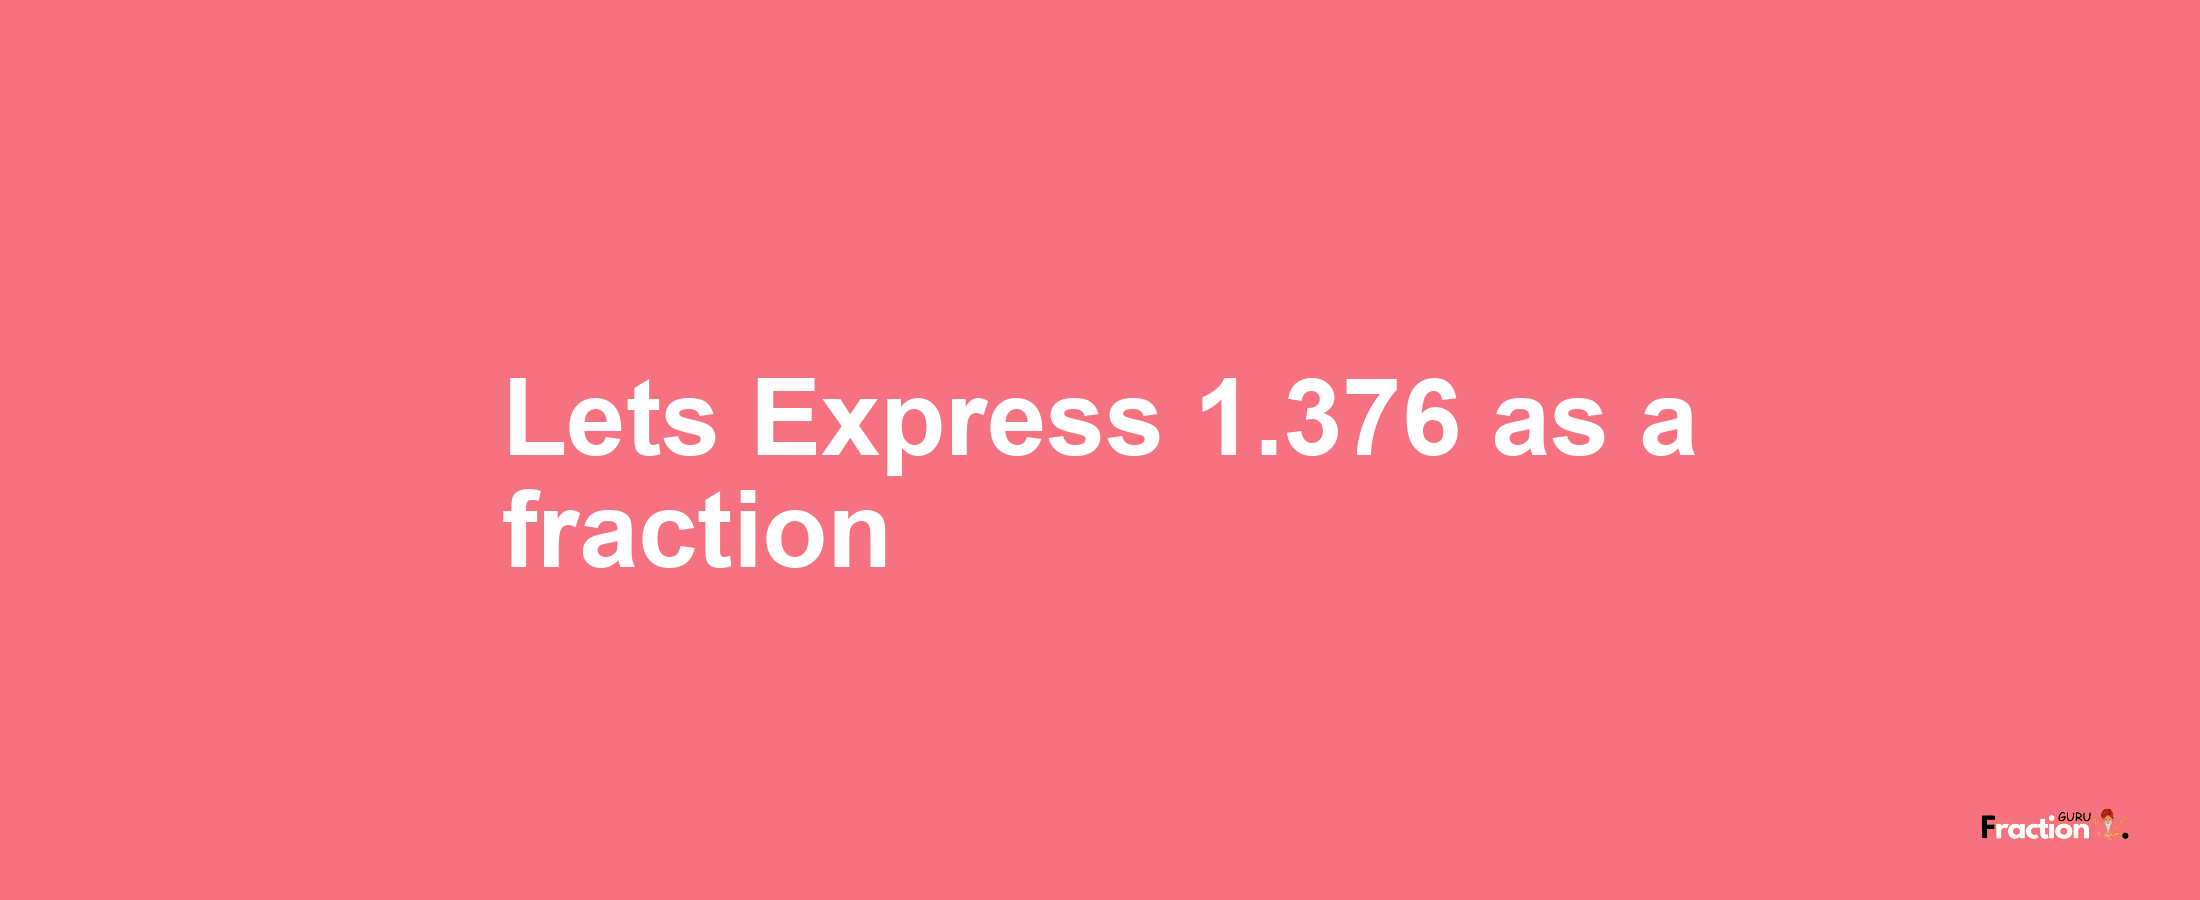 Lets Express 1.376 as afraction